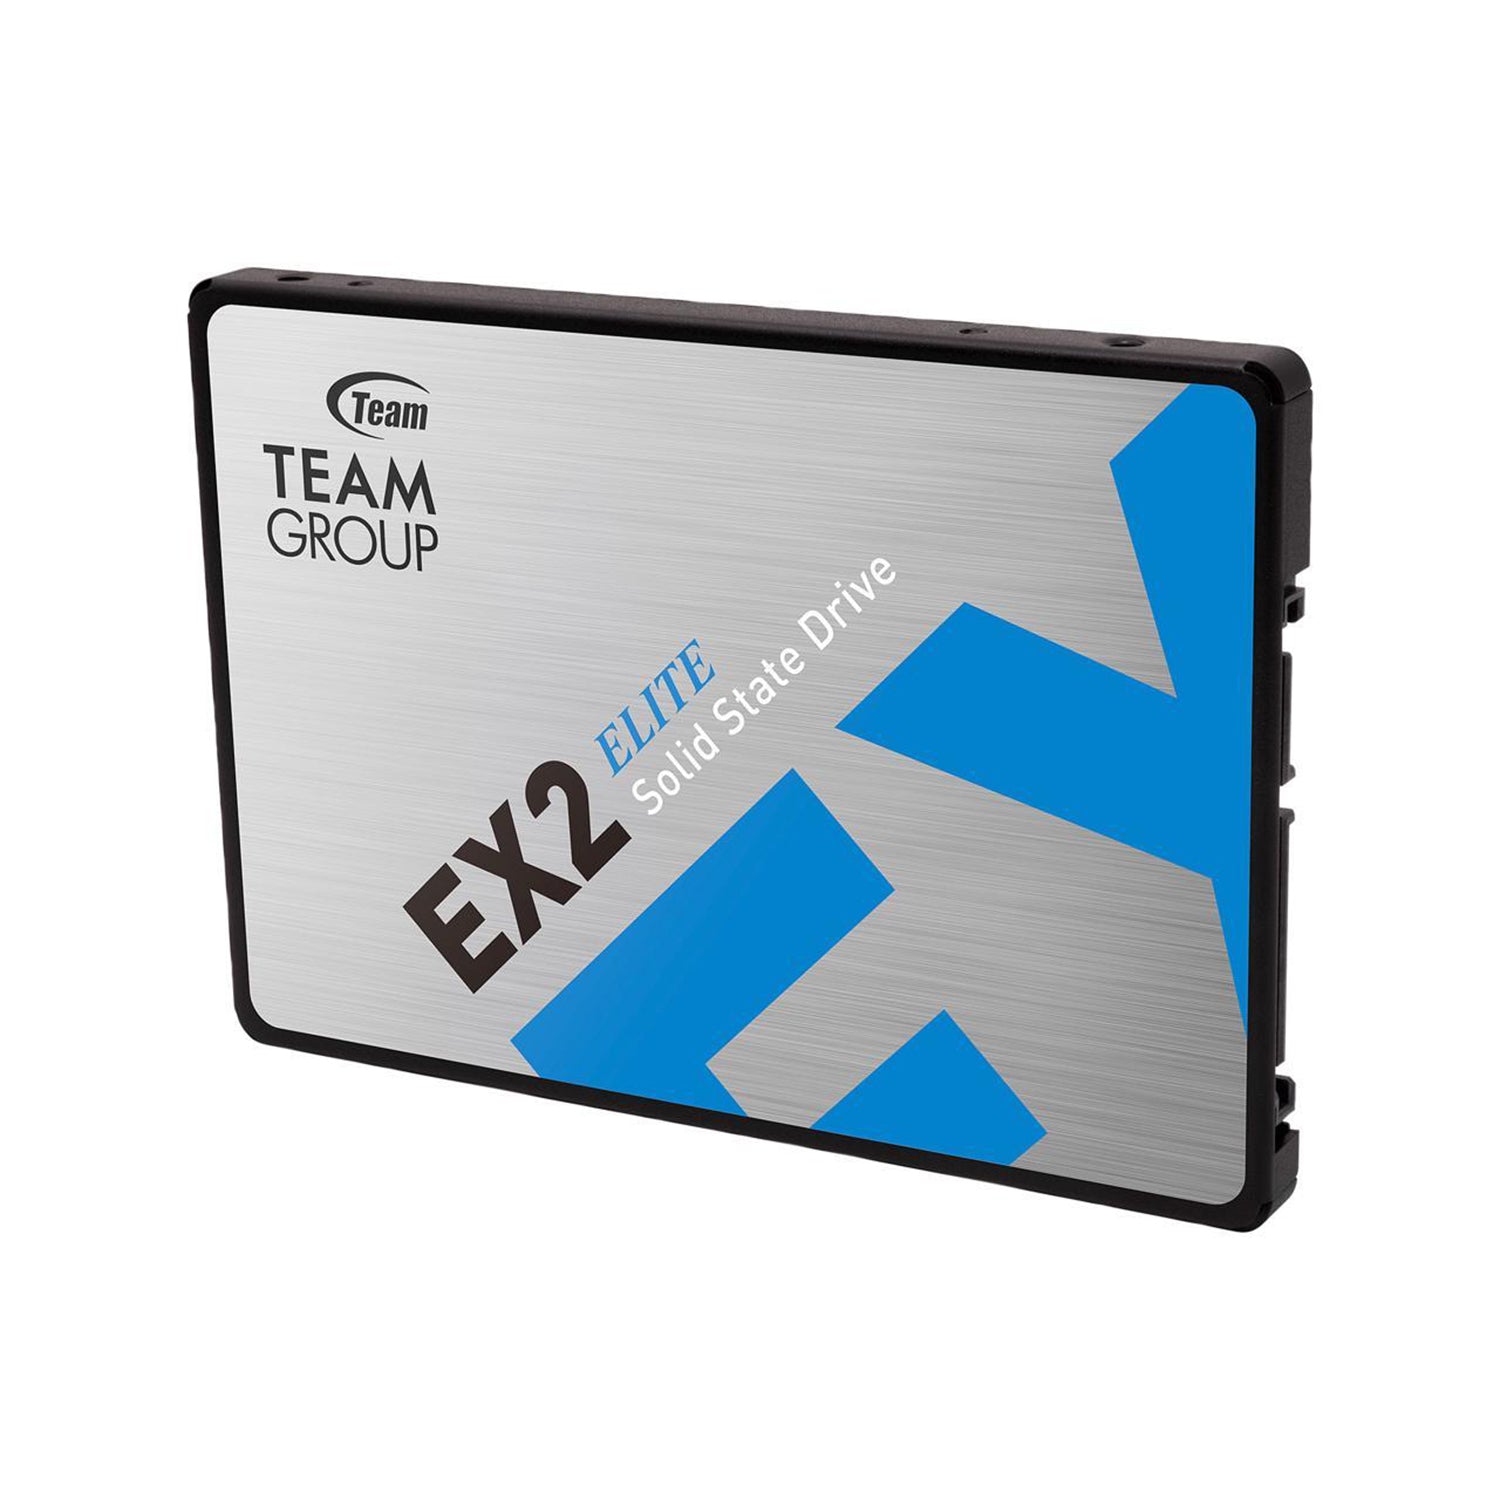 Team Group EX2 - 2TB Internal Solid State Drive (SSD), 2.5" Form Factor, SATA III (6.0 Gb/s) Interface, 3D NAND, Read Speed Up to 550 MB/s for laptops, desktops (T253E2002T0C101)